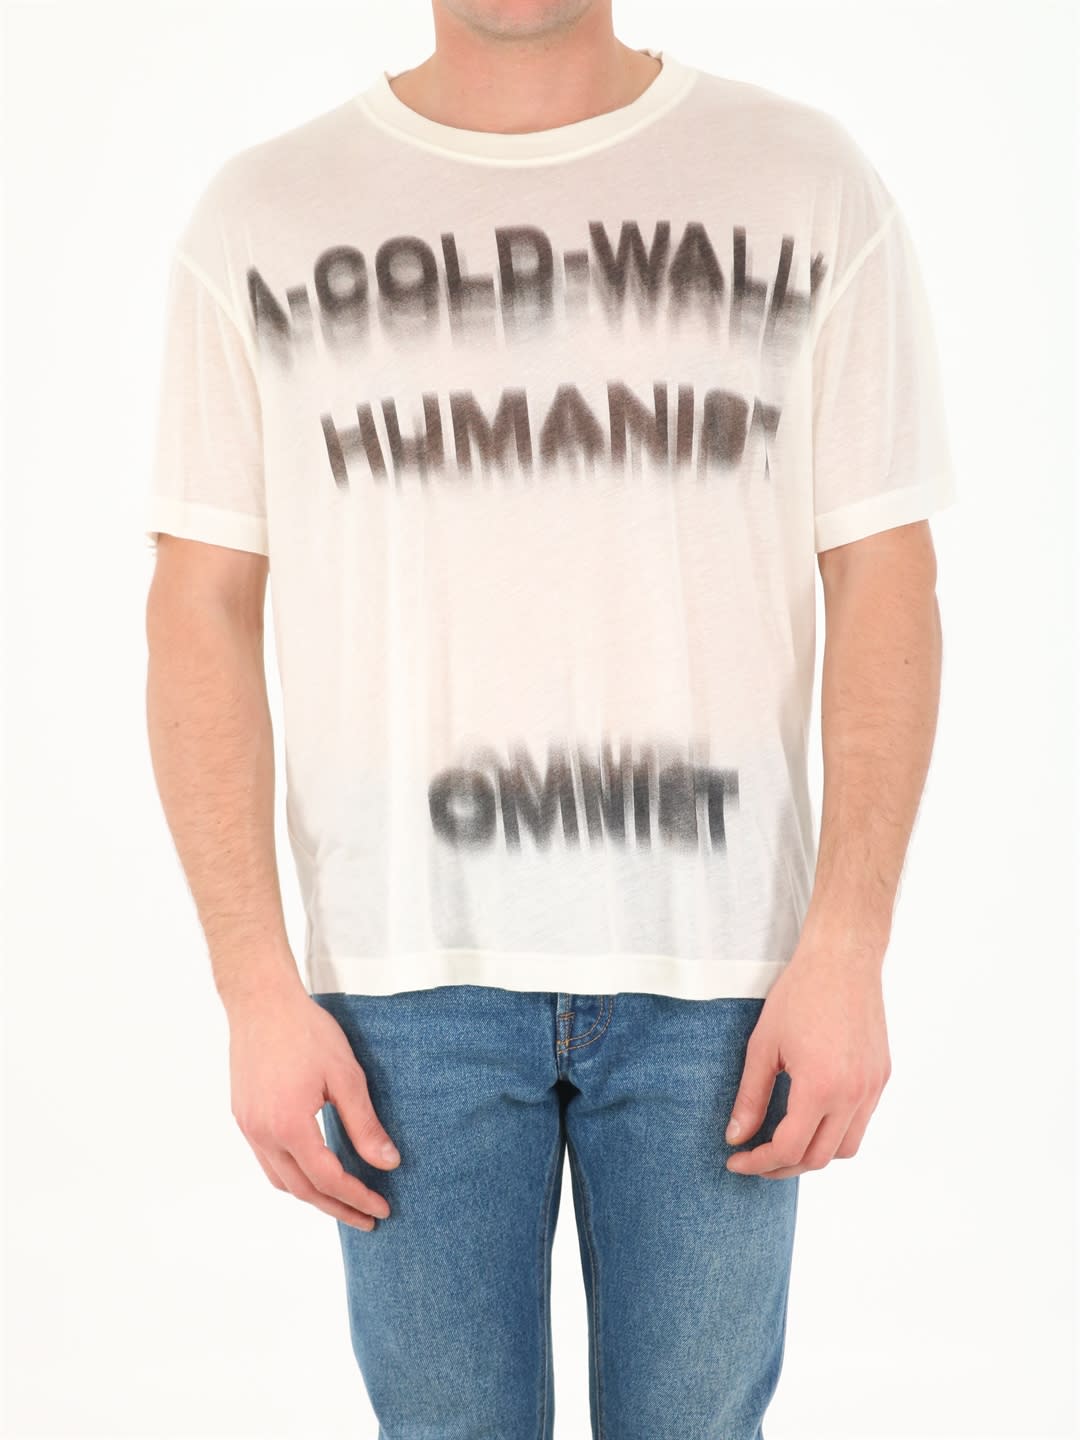 A-COLD-WALL White T-shirt With Print